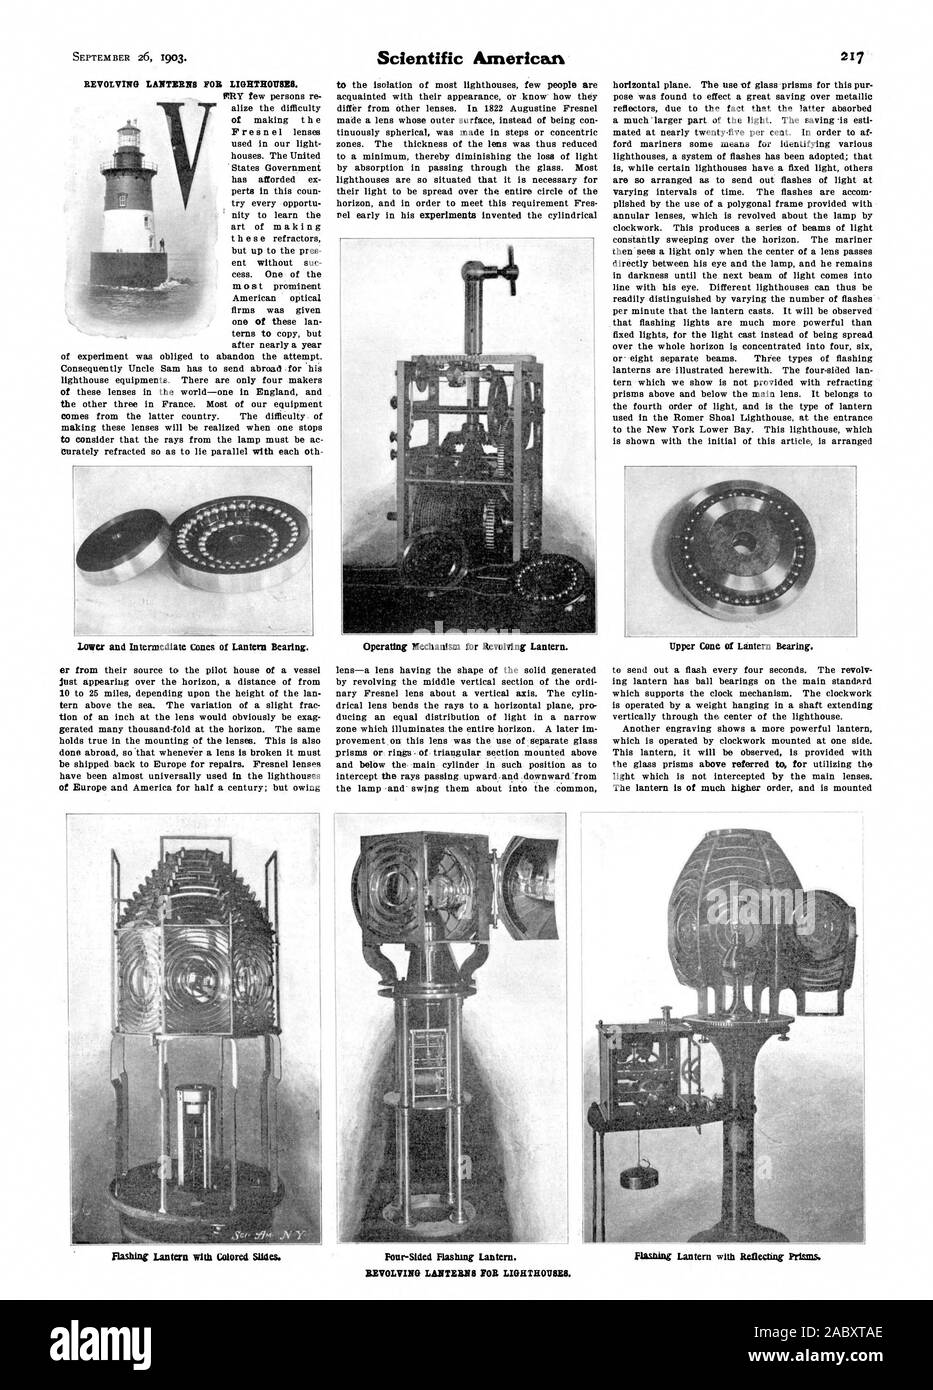 Lower and Intermediate cones of Lantern Bearing. Operating Mechanism for Revolving Lantern. Upper Cone of Lantern Bearing. Flashing Lantern with Colored Slides. flashing Lantern with Reflecting Prisms. Four-Sided Flashing Lantern. REVOLVING LANTERN8 FOR LIGHTHOUSES., scientific american, 1903-09-26 Stock Photo